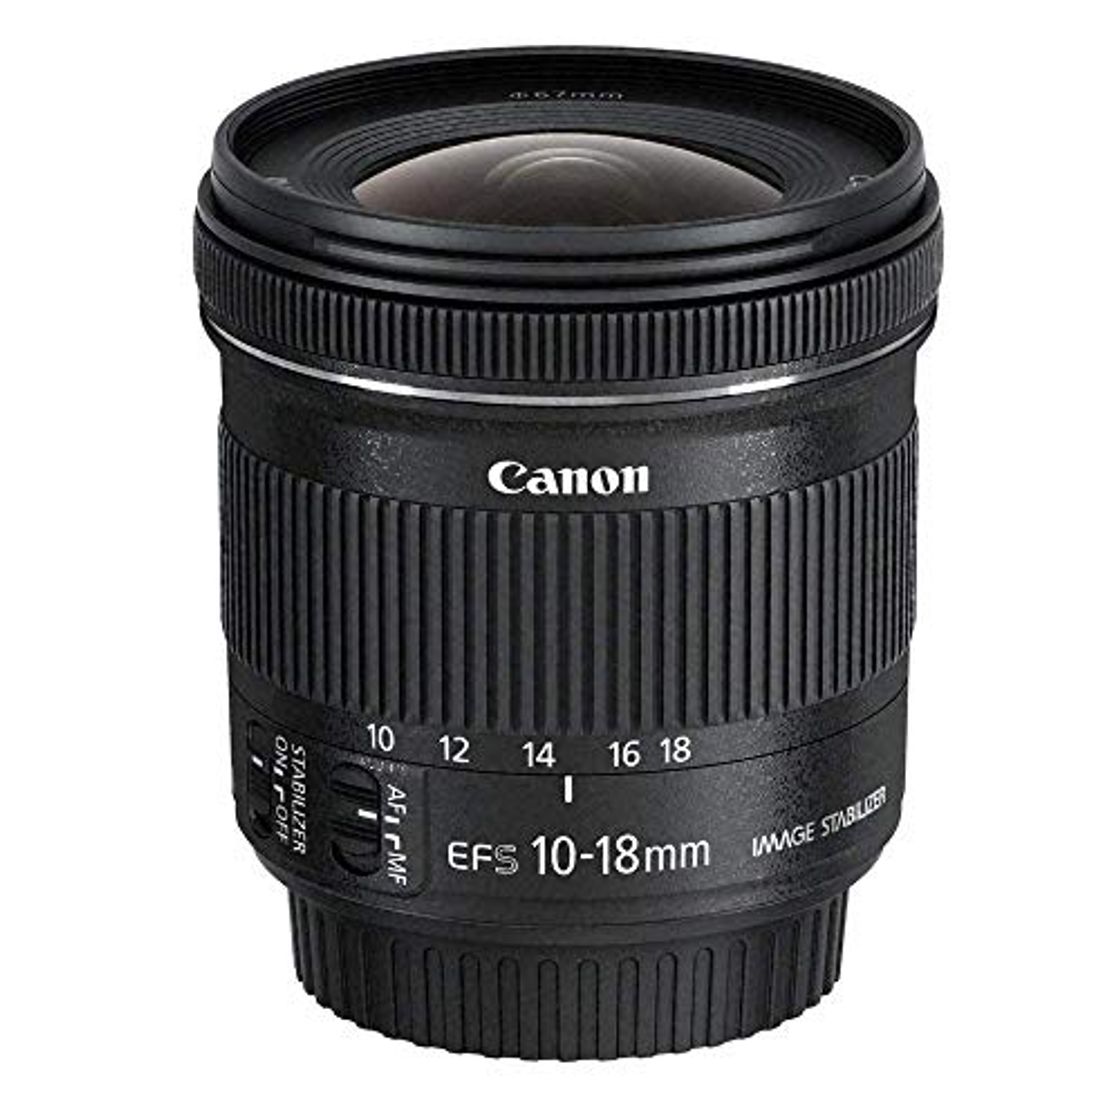 Canon EF-S 10-18 mm f:4.5-5.6 IS STM - Objetivo para Canon